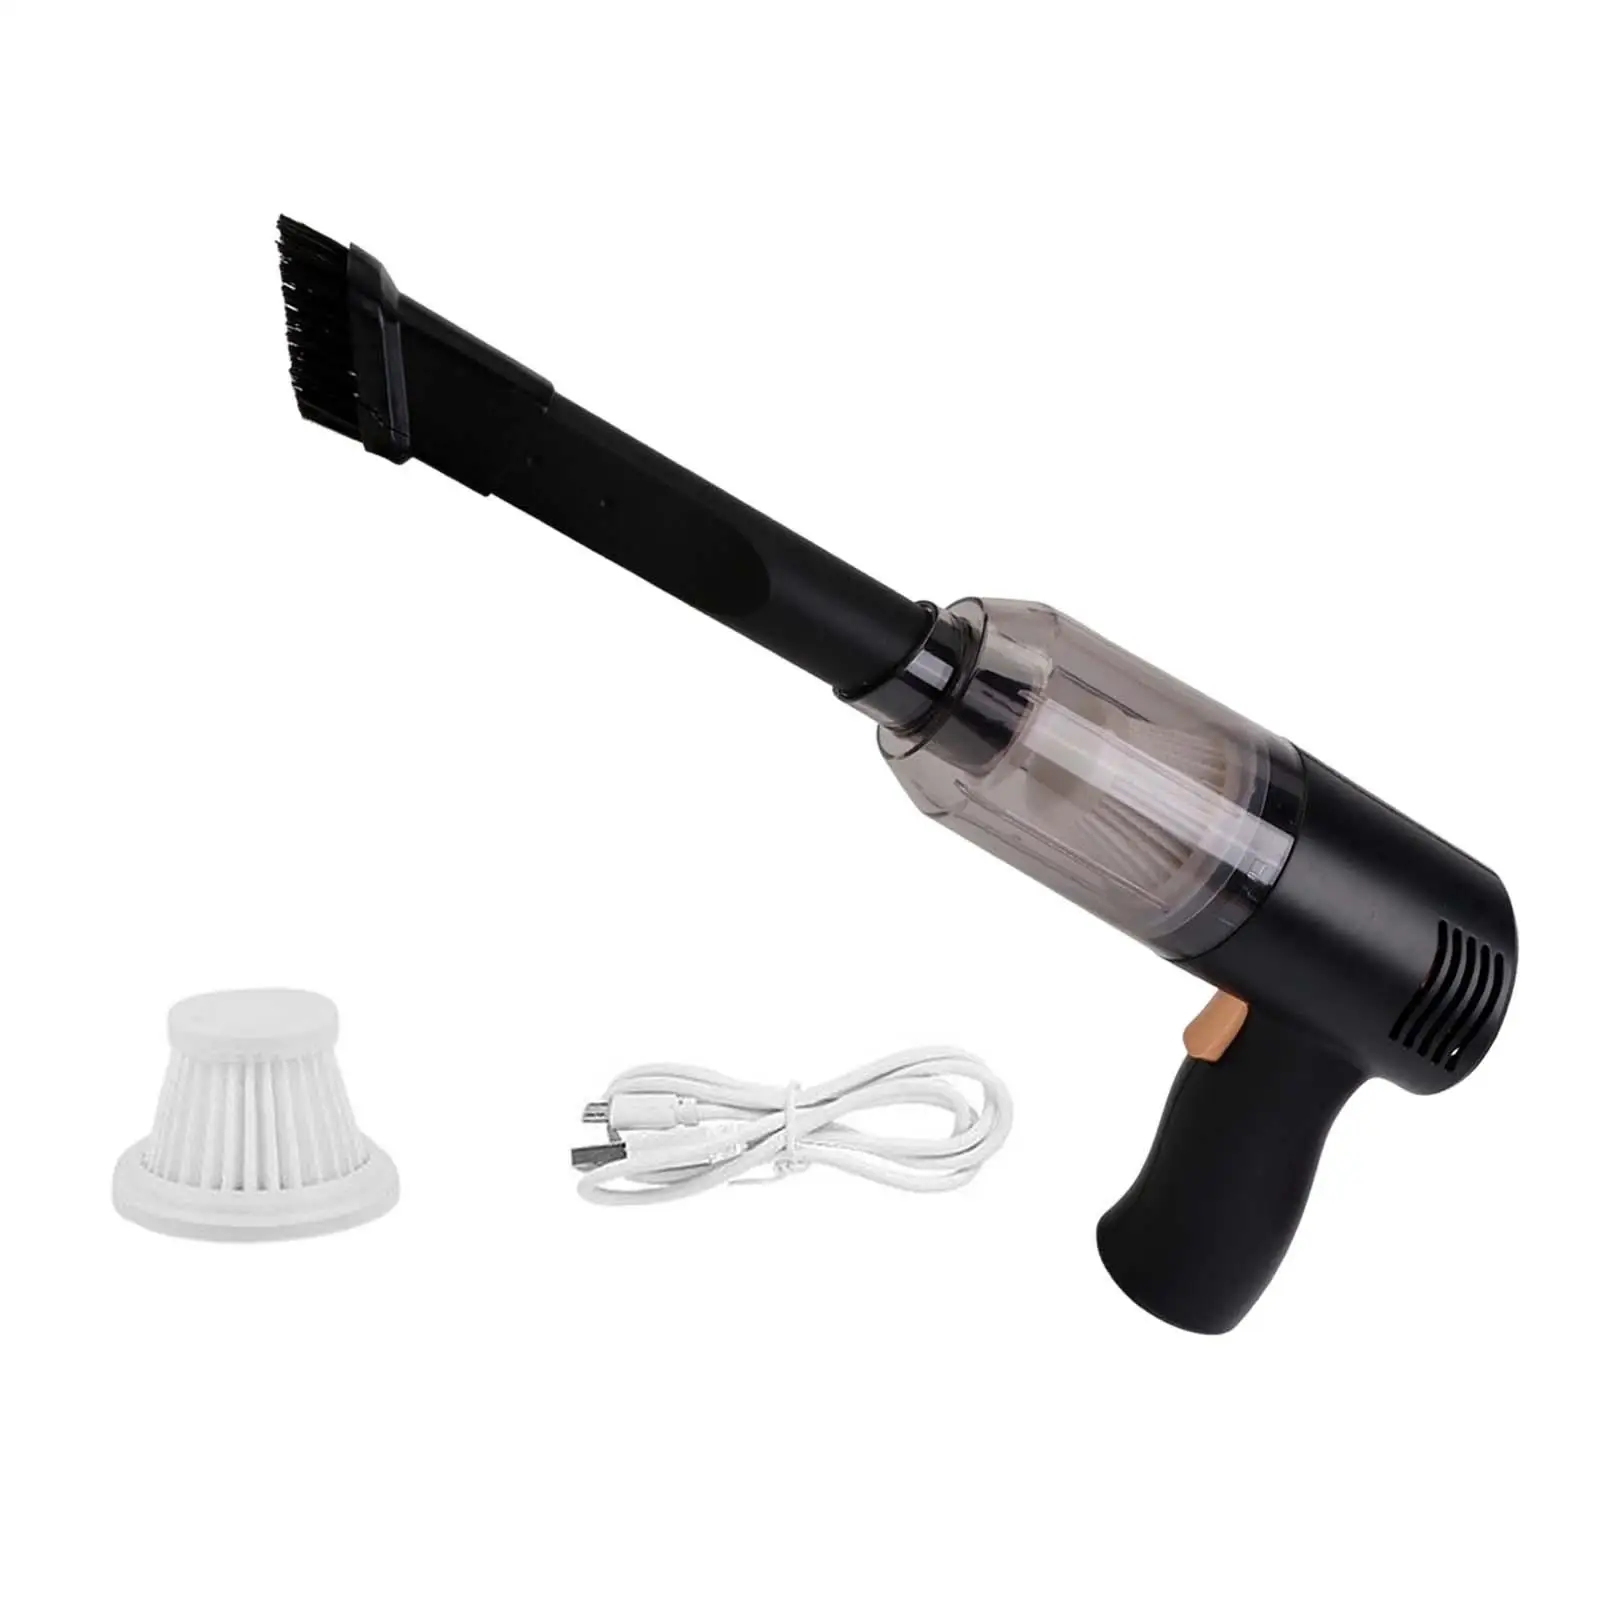 Car Vacuum Easy to Use High Power Portable Hand Vacuum Cleaner USB Rechargeable Mini Vacuum Cleaner for Office Pet Hair Keyboard